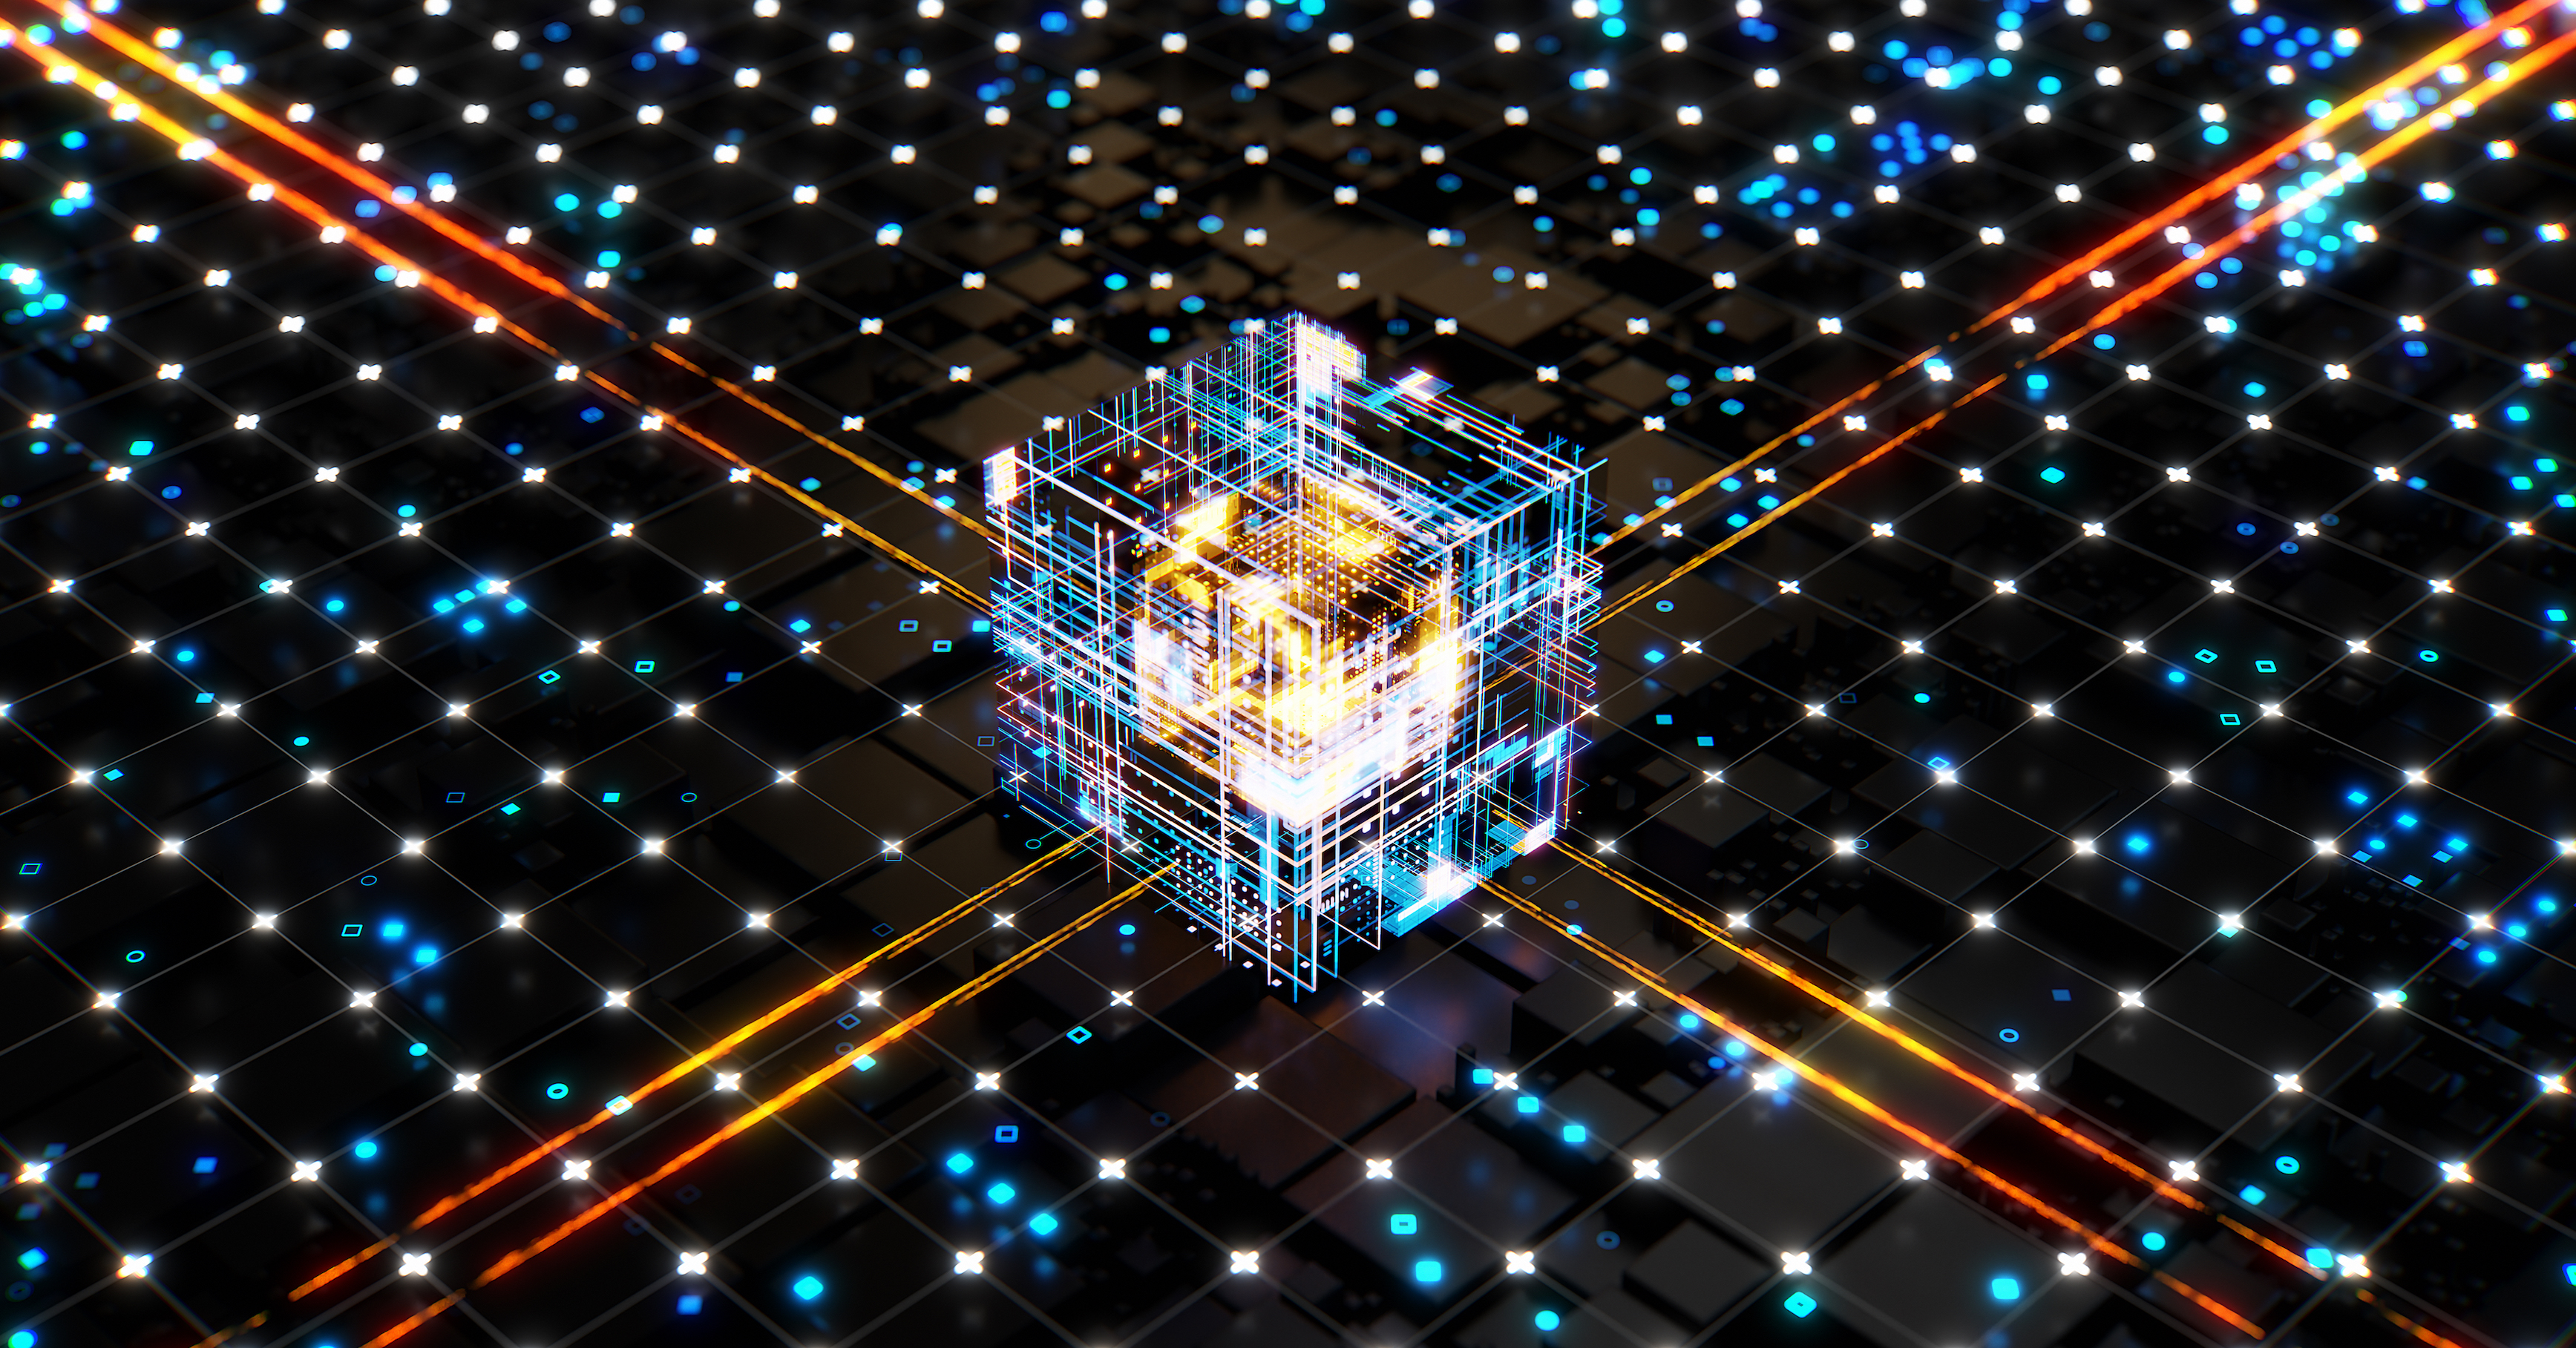 Artistic depiction of how a quantum computer works, connecting numerous points at varying distances apart.